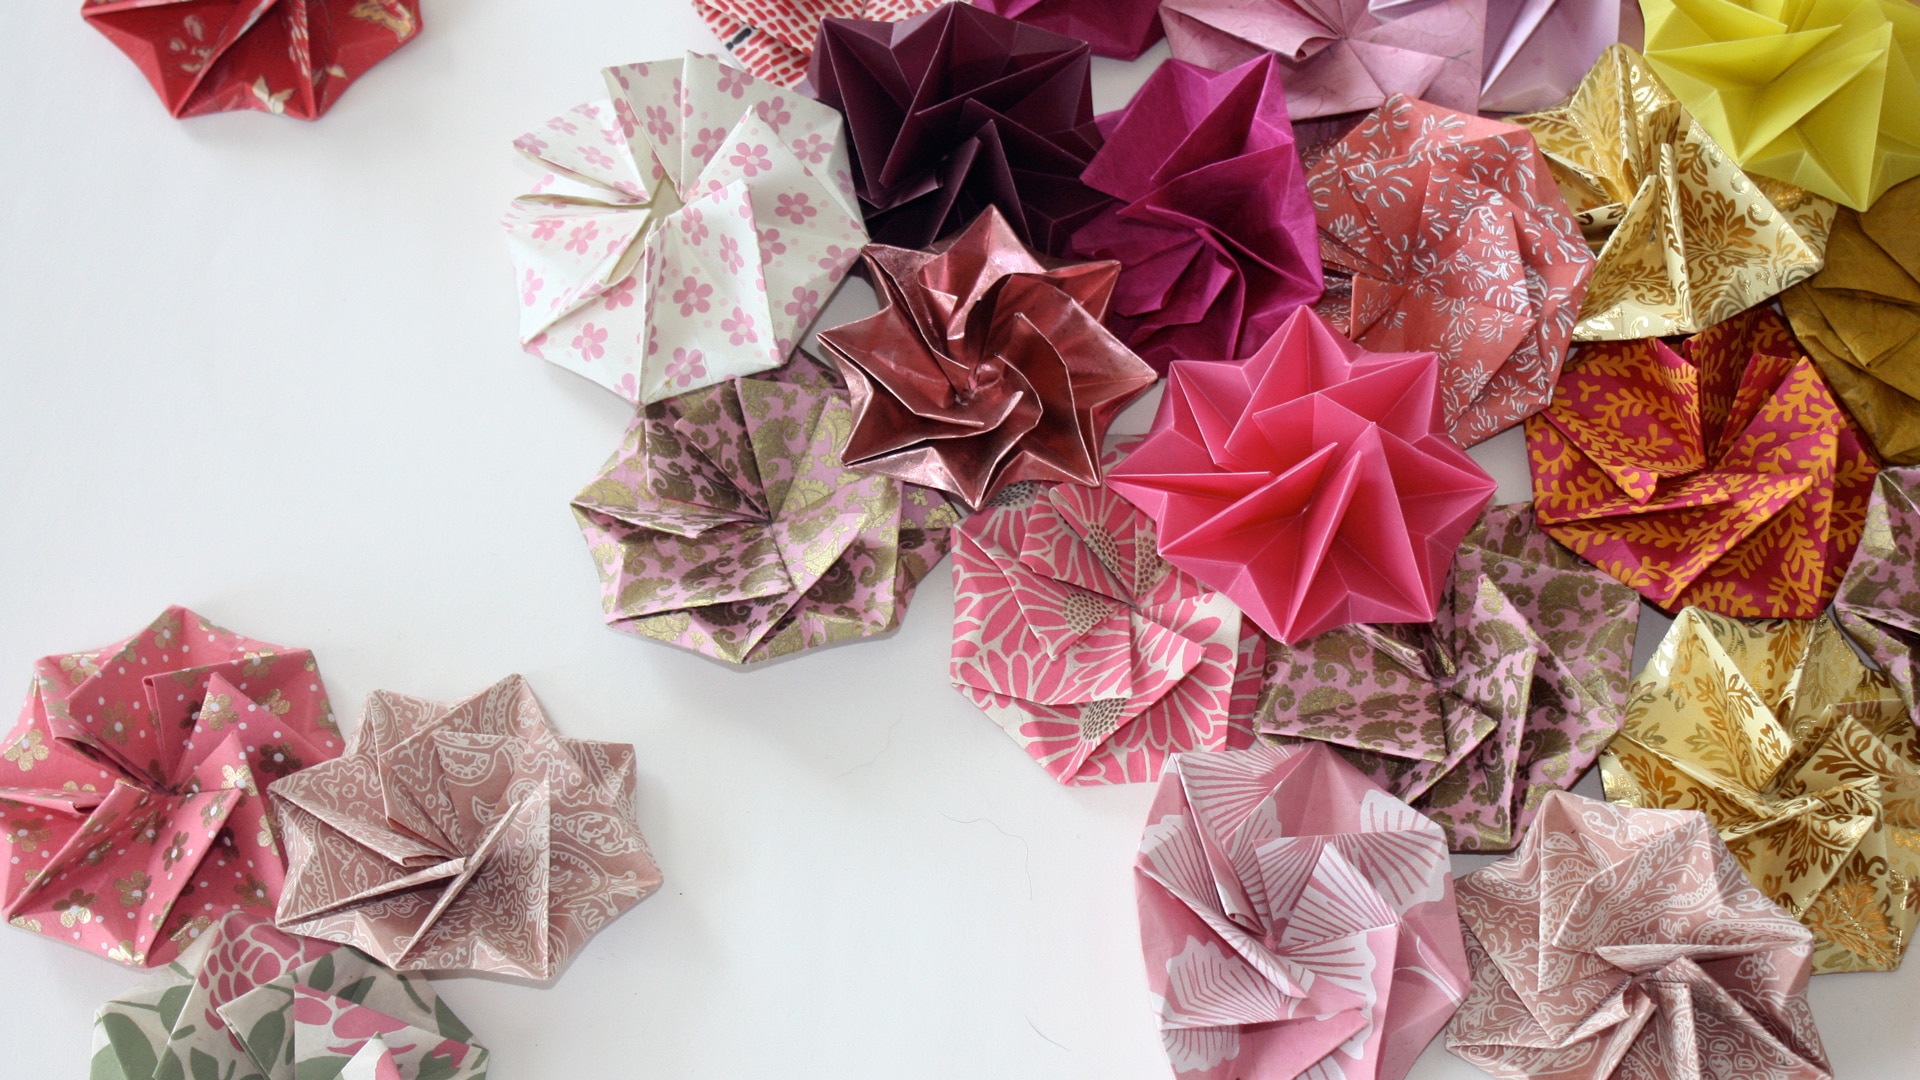 An image of origami paper shapes to demonstrate what can be made in the workshop